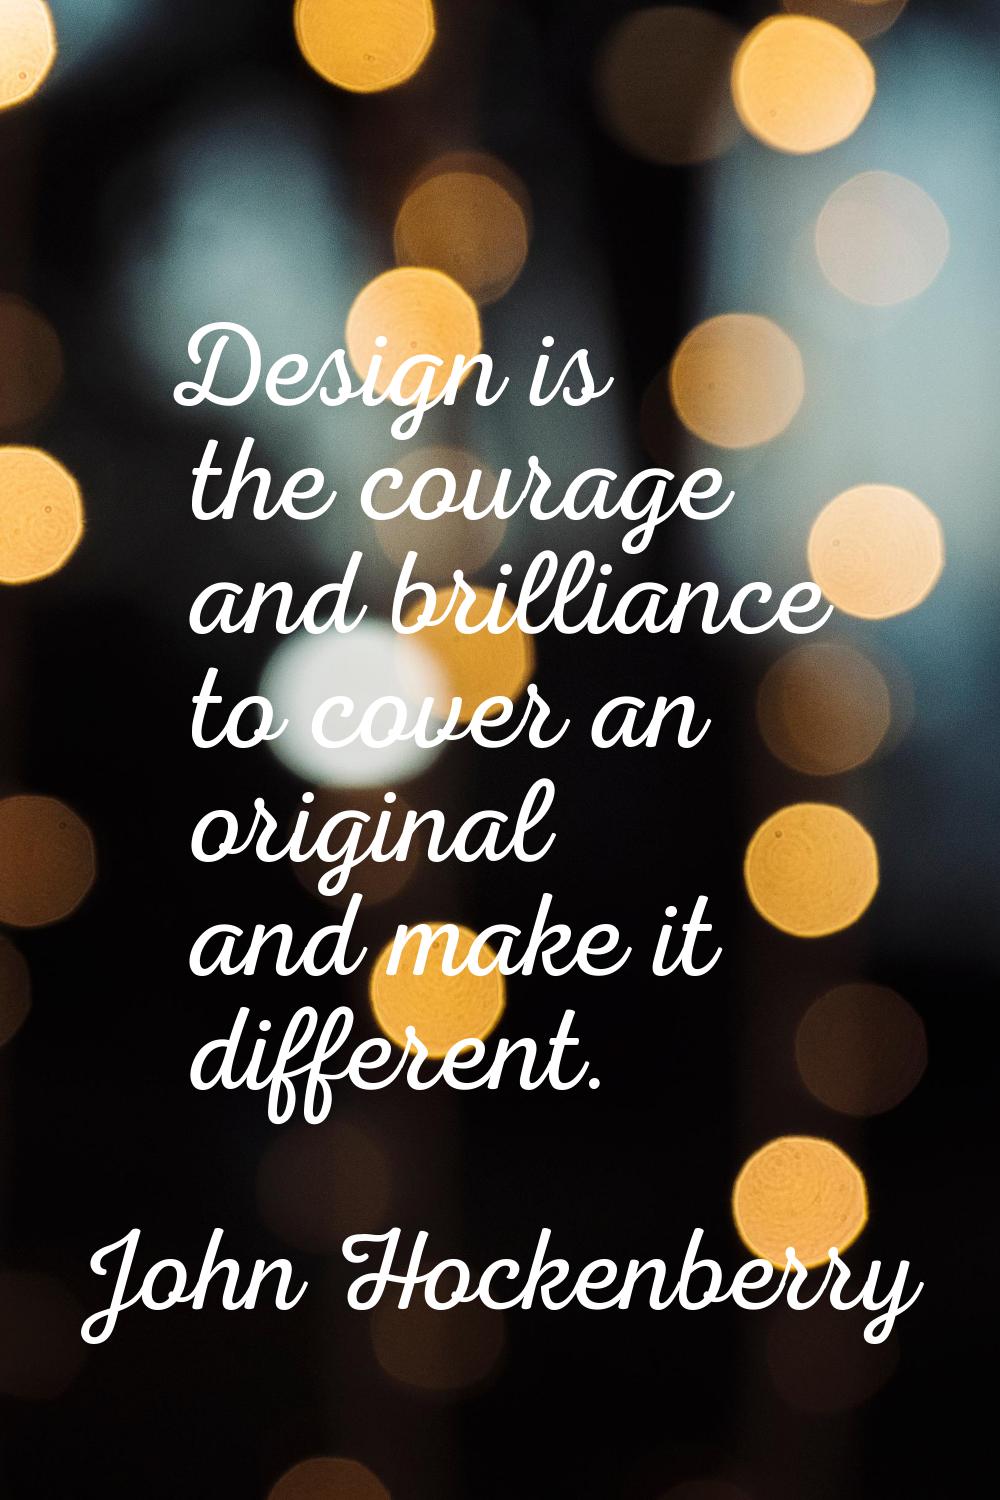 Design is the courage and brilliance to cover an original and make it different.